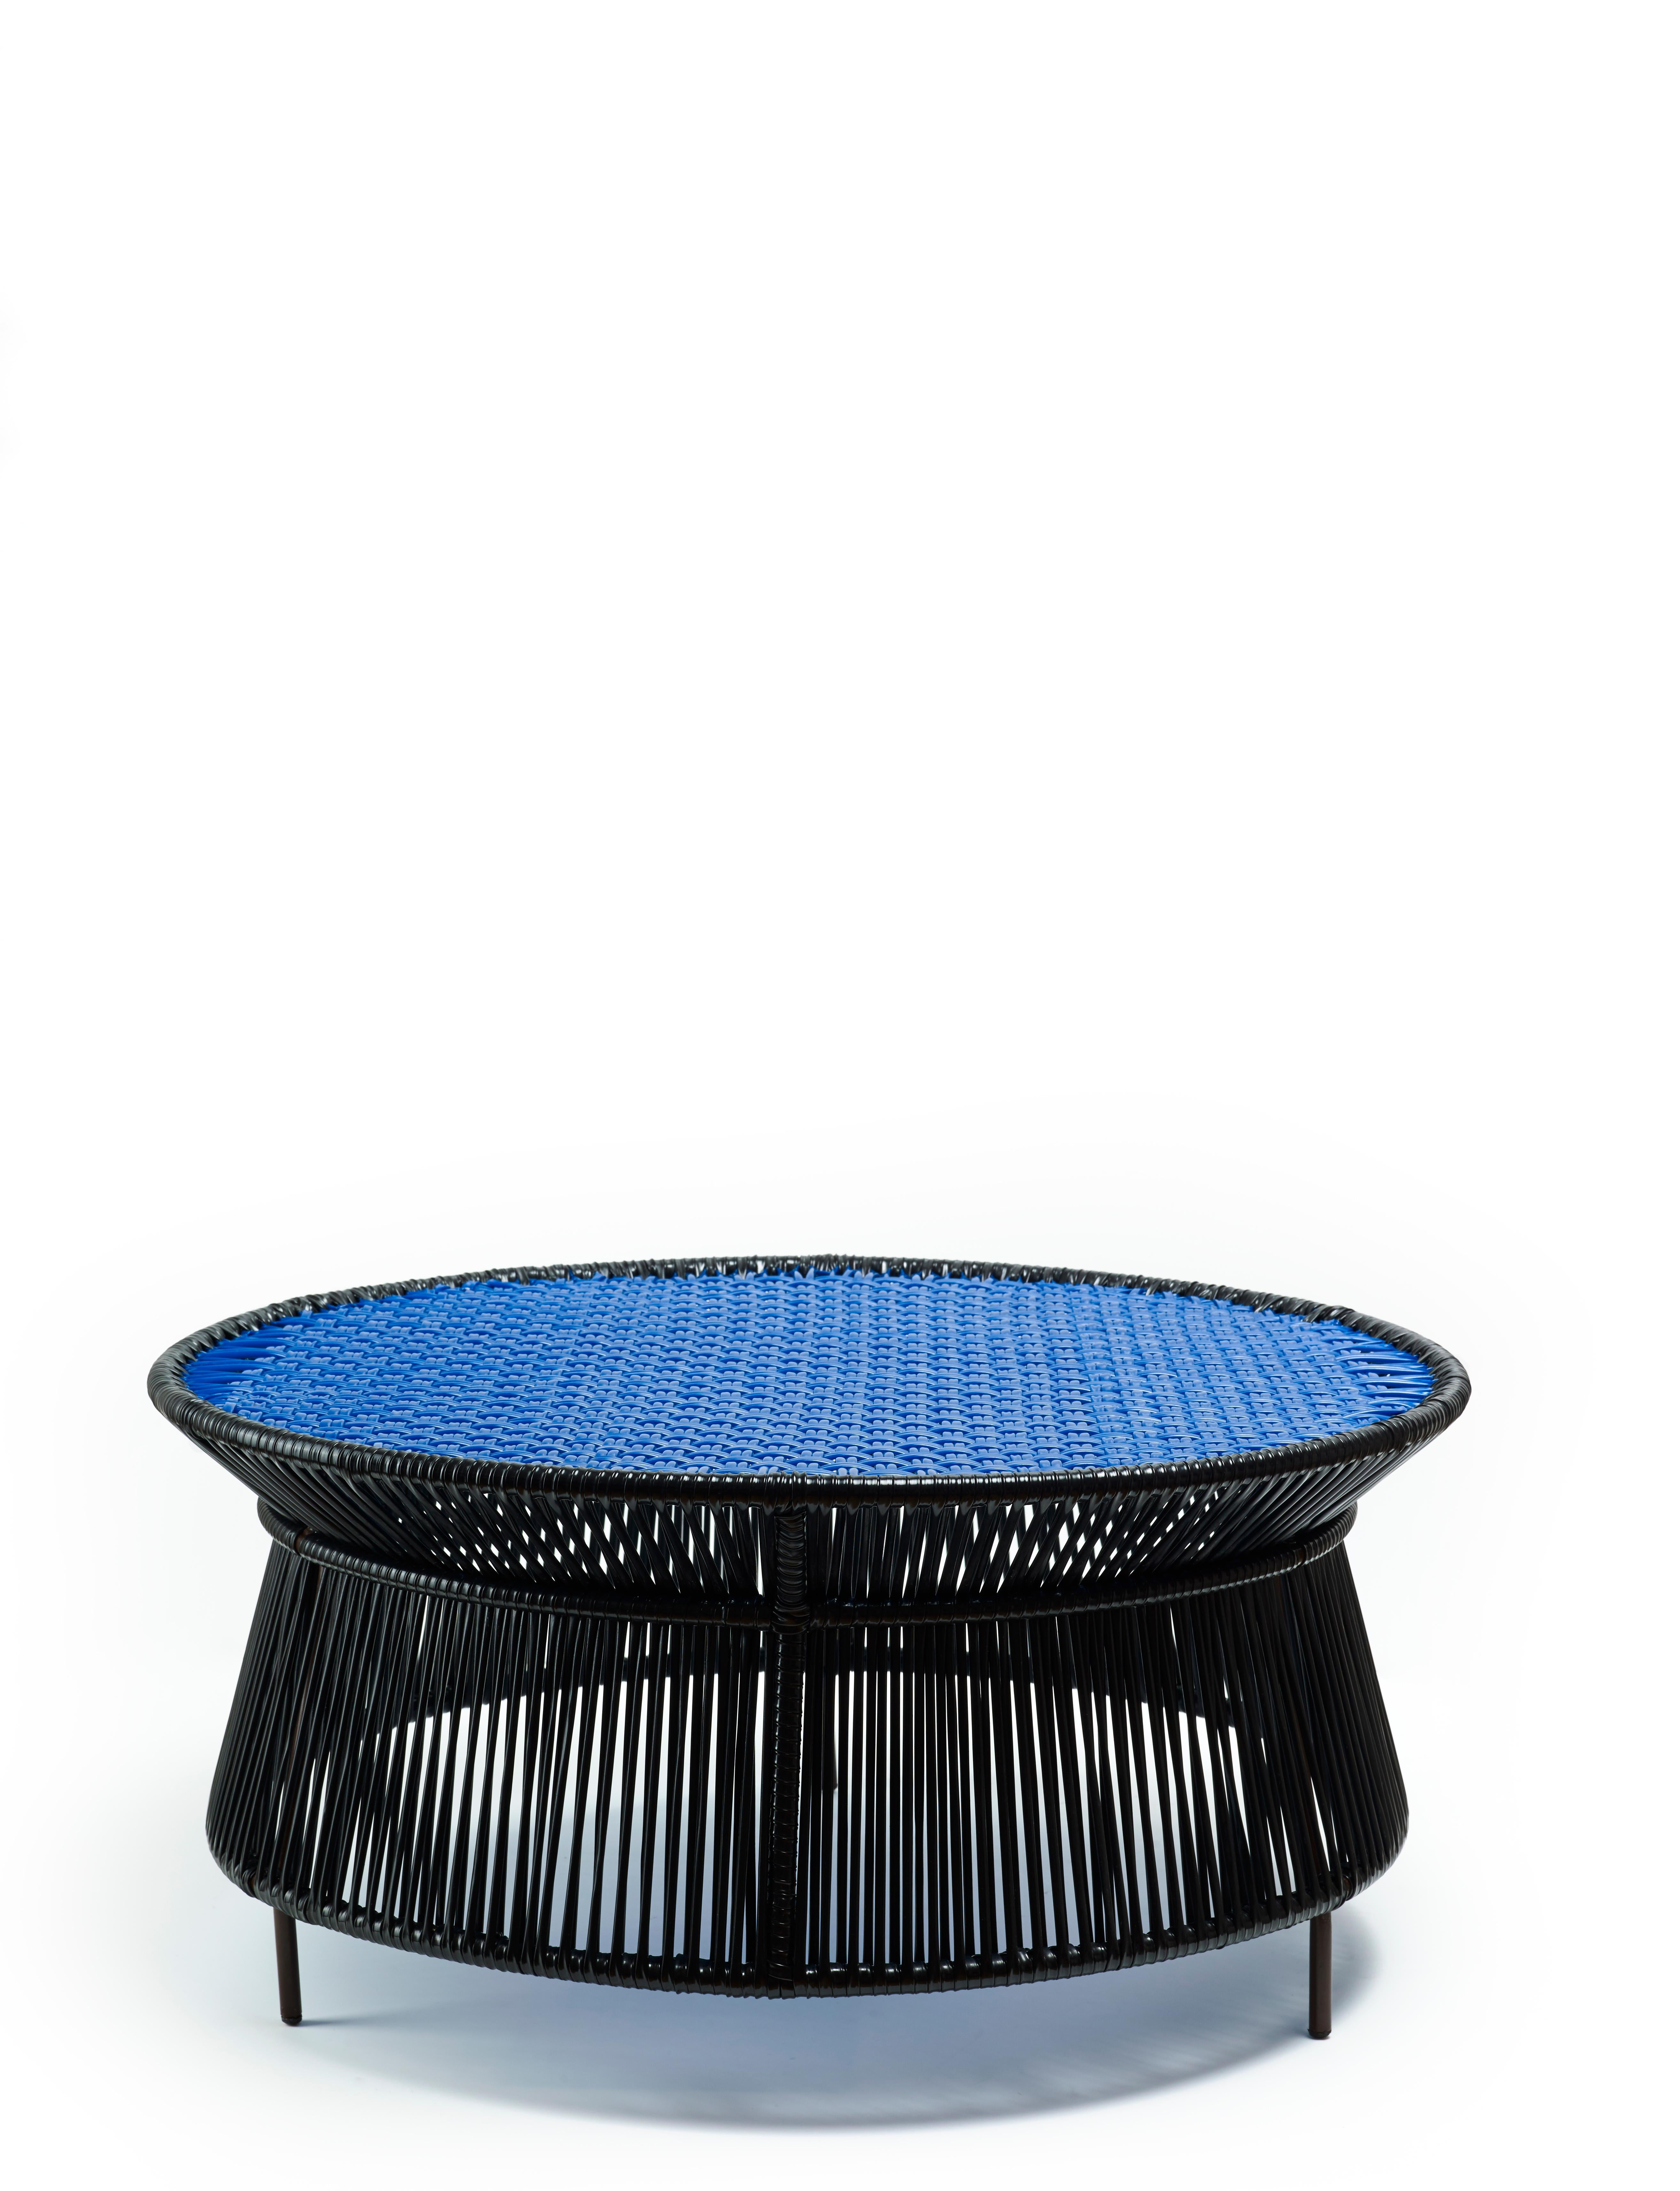 Black Caribe low table by Sebastian Herkner.
Materials: Galvanized and powder-coated tubular steel. PVC strings are made from recycled plastic.
Technique: Made from recycled plastic and weaved by local craftspeople in Colombia. 
Dimensions: